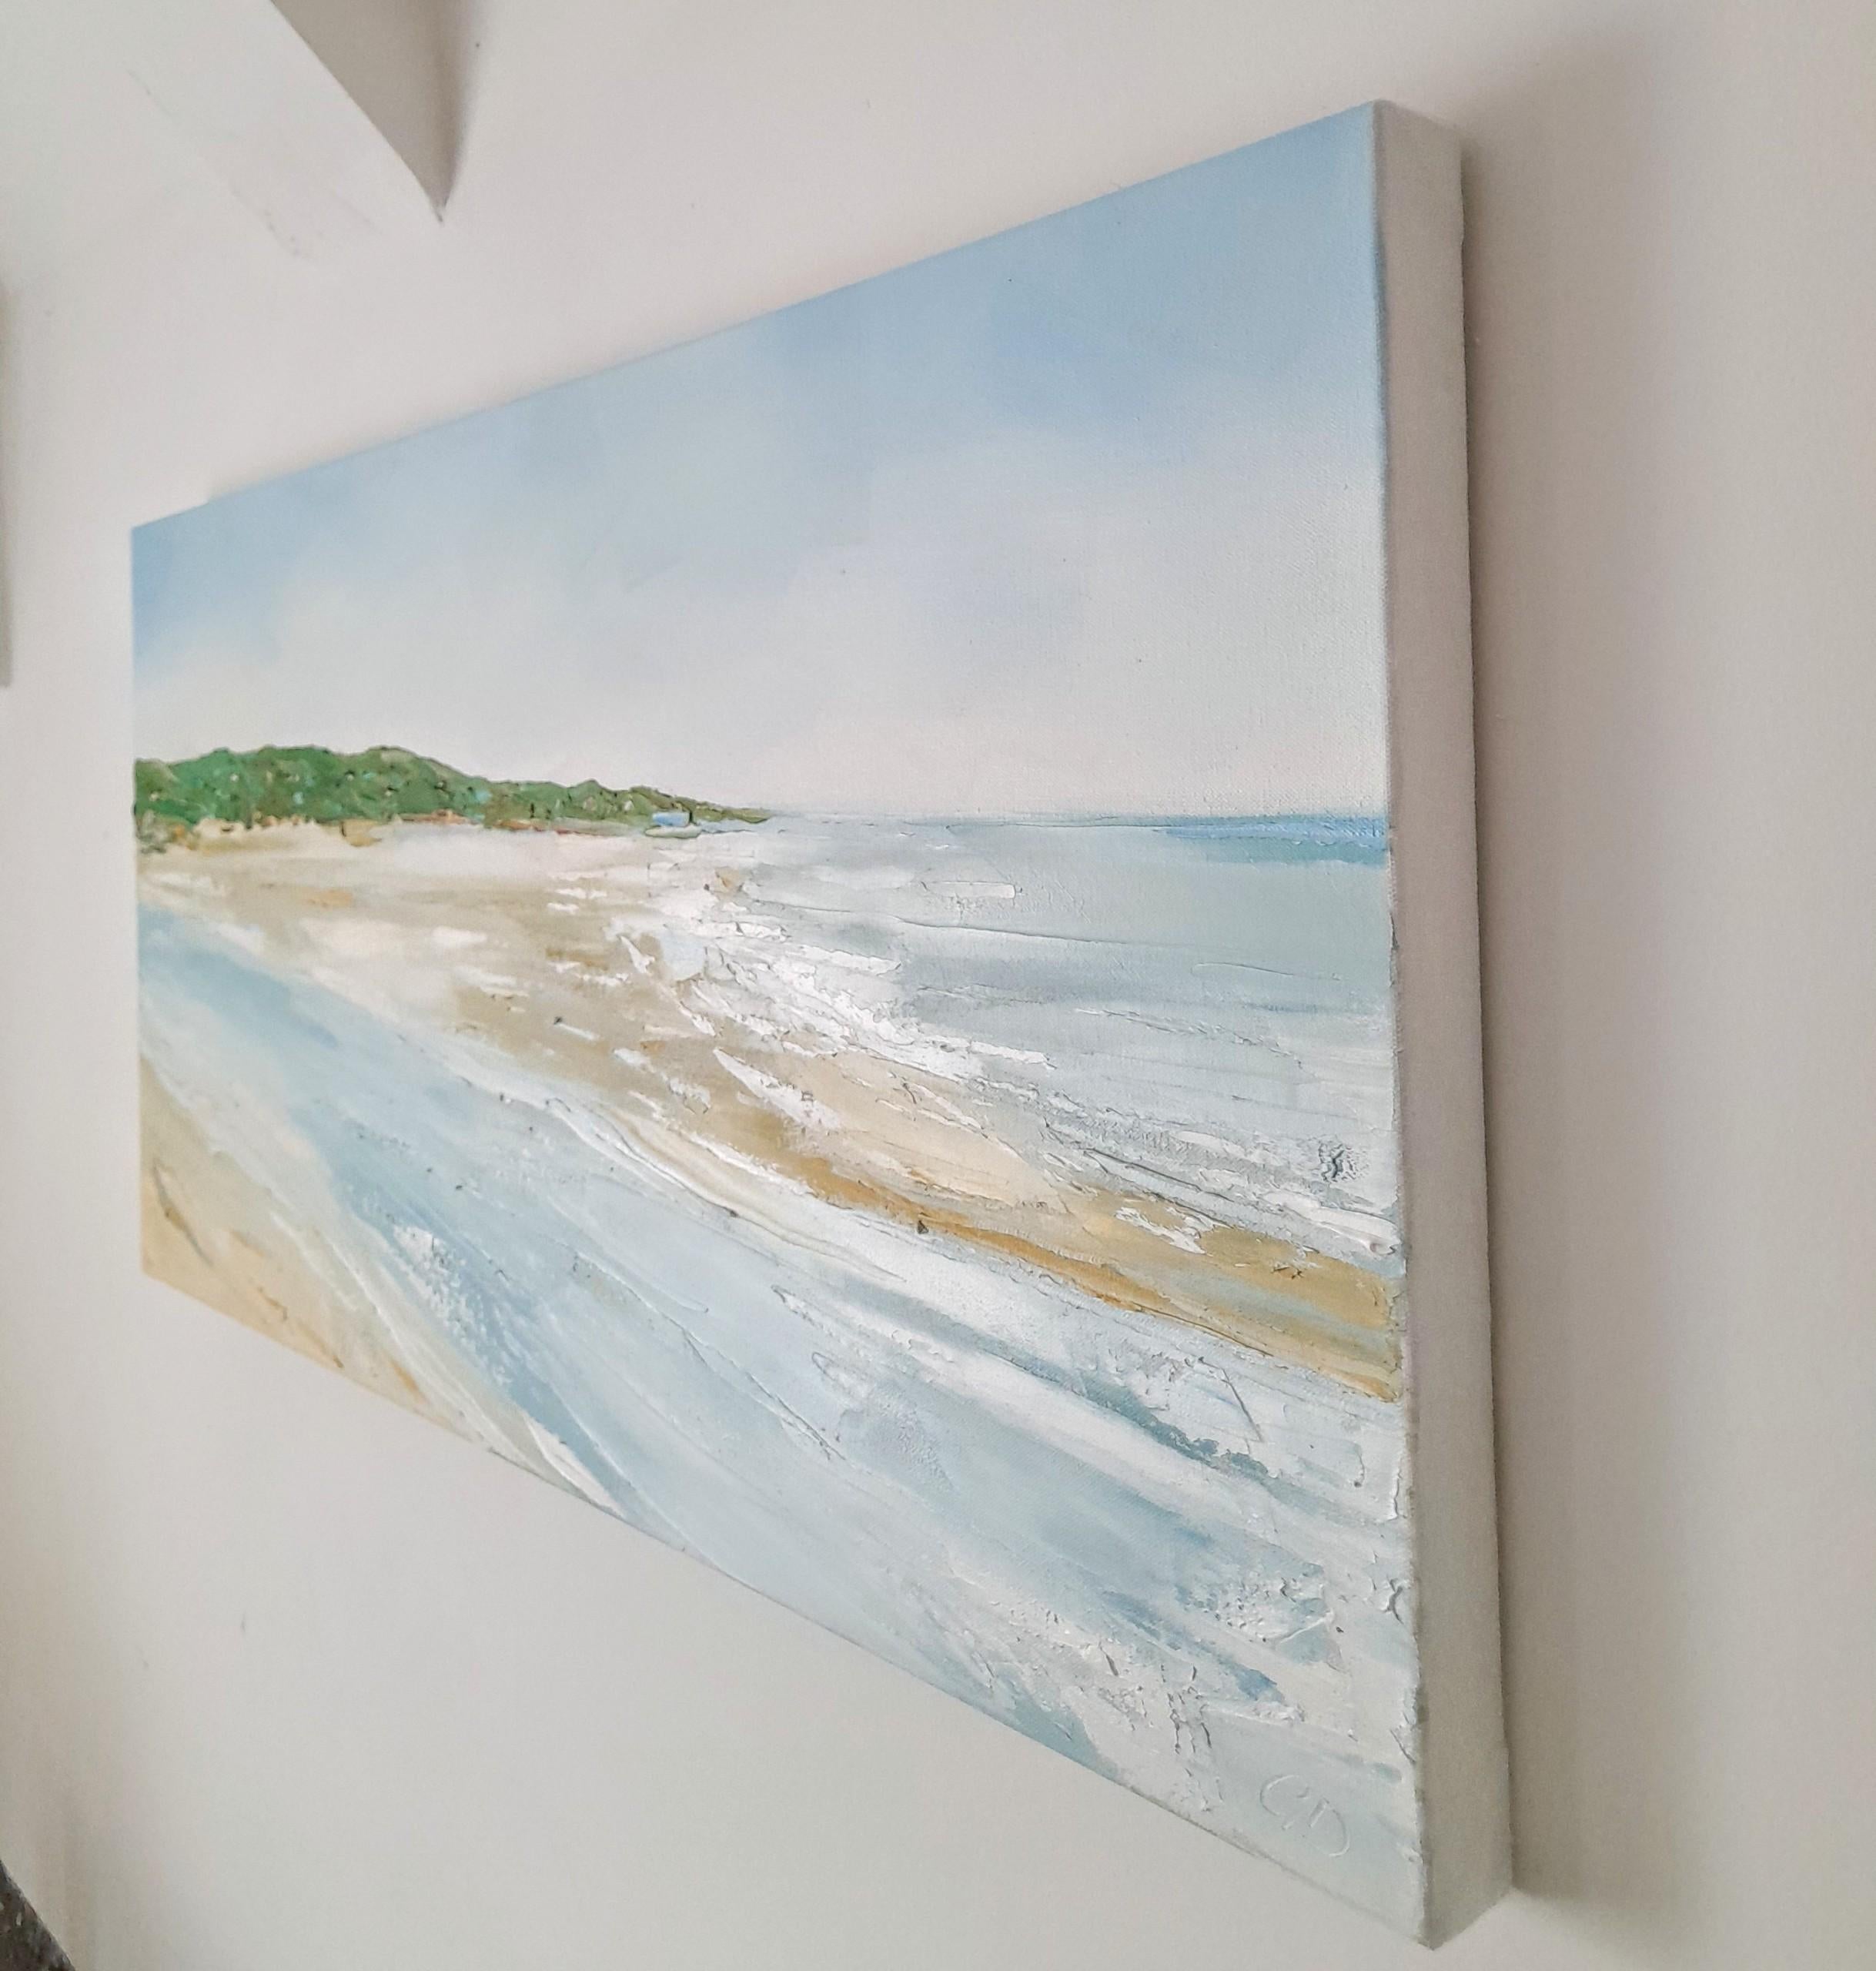 An original oil painting on canvas portraying the view across the beach from Gwbert, Cardigan bay in West Wales. White cottages in the hills typical of the welsh landscape look across the quiet beach. The hills and houses are built up of thick paint